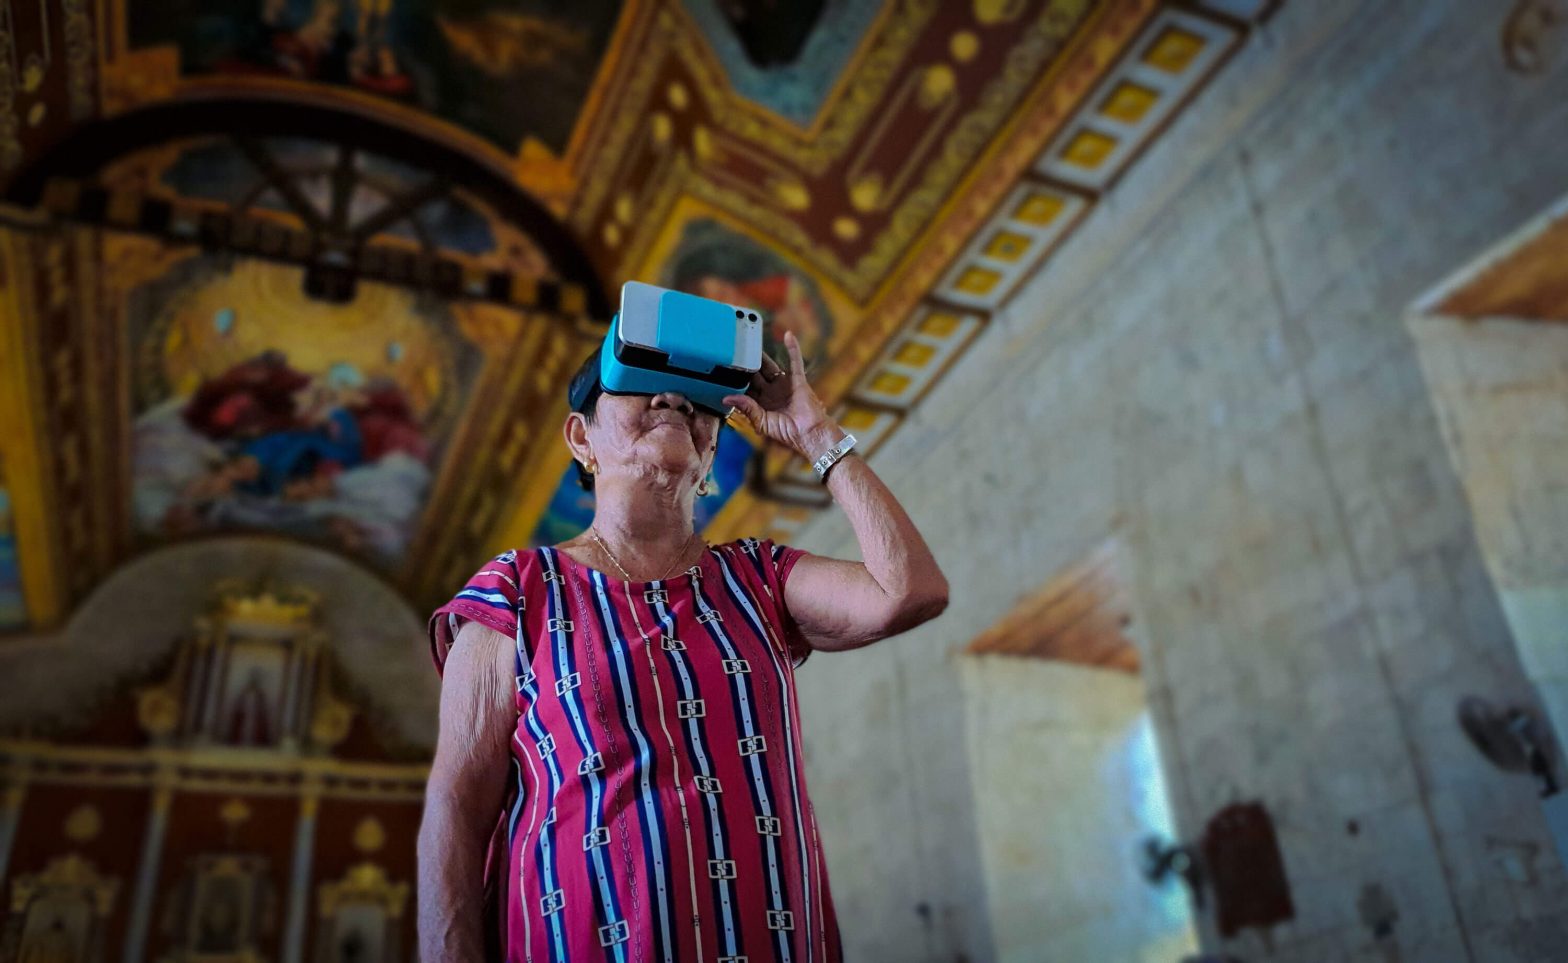 Cebu Archdiocese ties up with Smart, InnoPub for historic exhibit